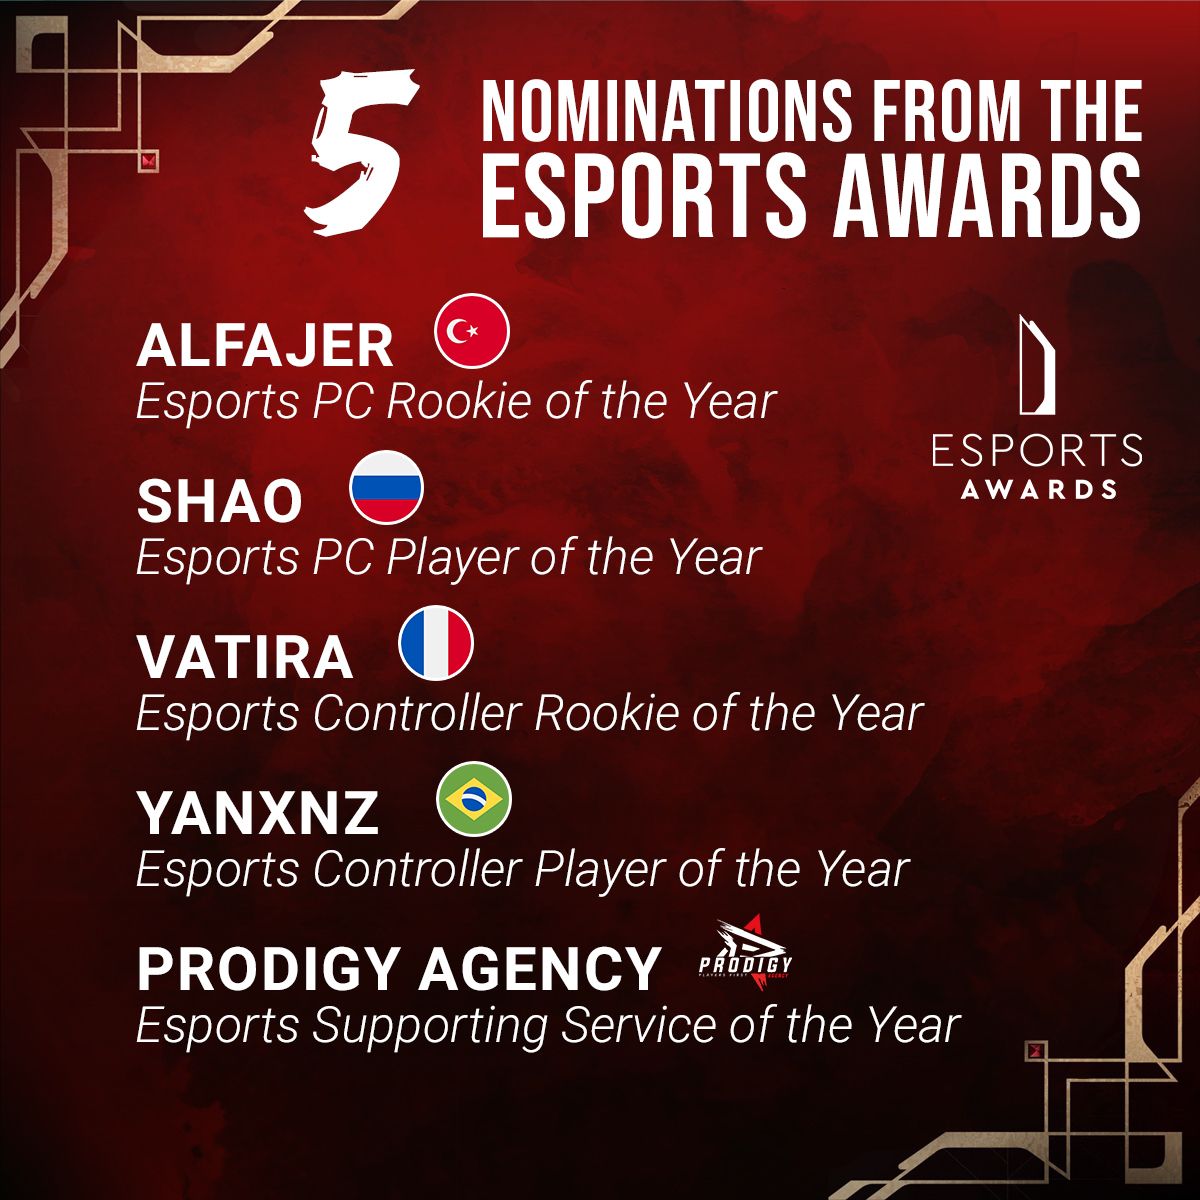 Prodigy Agency receive a total of five nominations from the Esports Awards 2022